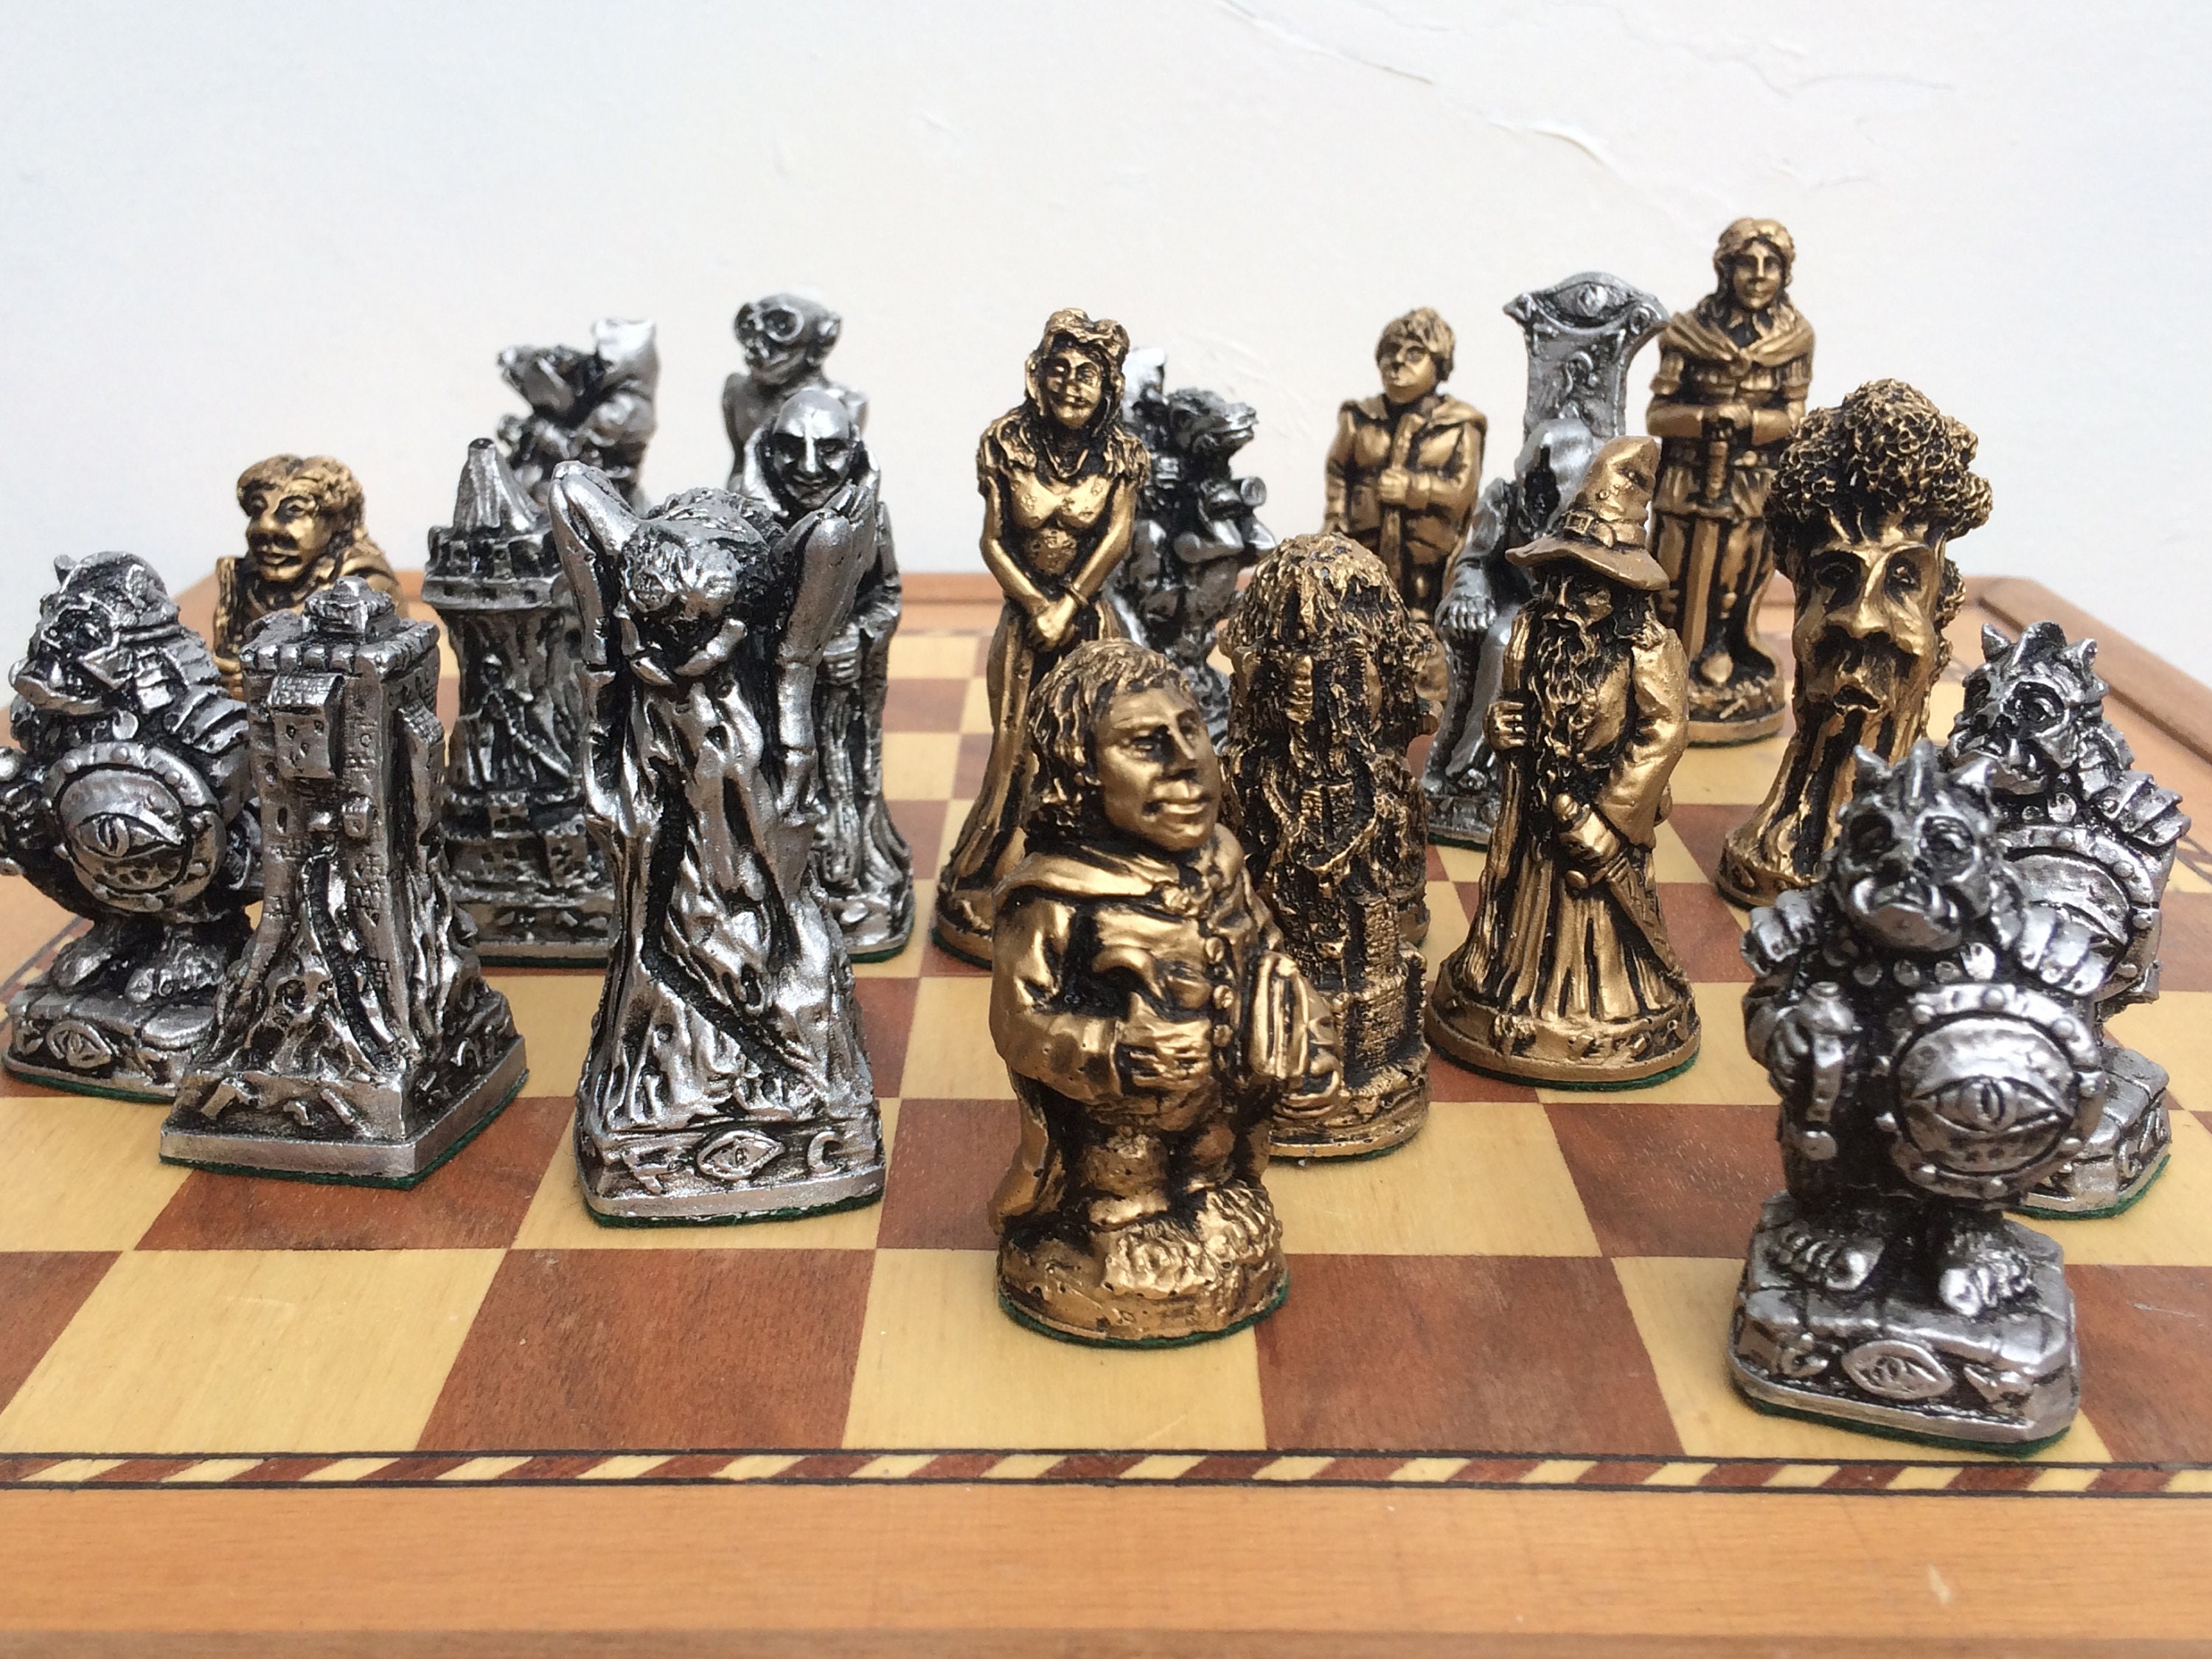 Vintage Lord of the Rings the Fellowship of the Ring LOTR Boxed Chess Set  Detailed Sculptured Pieces Sport Games Puzzles Gift 